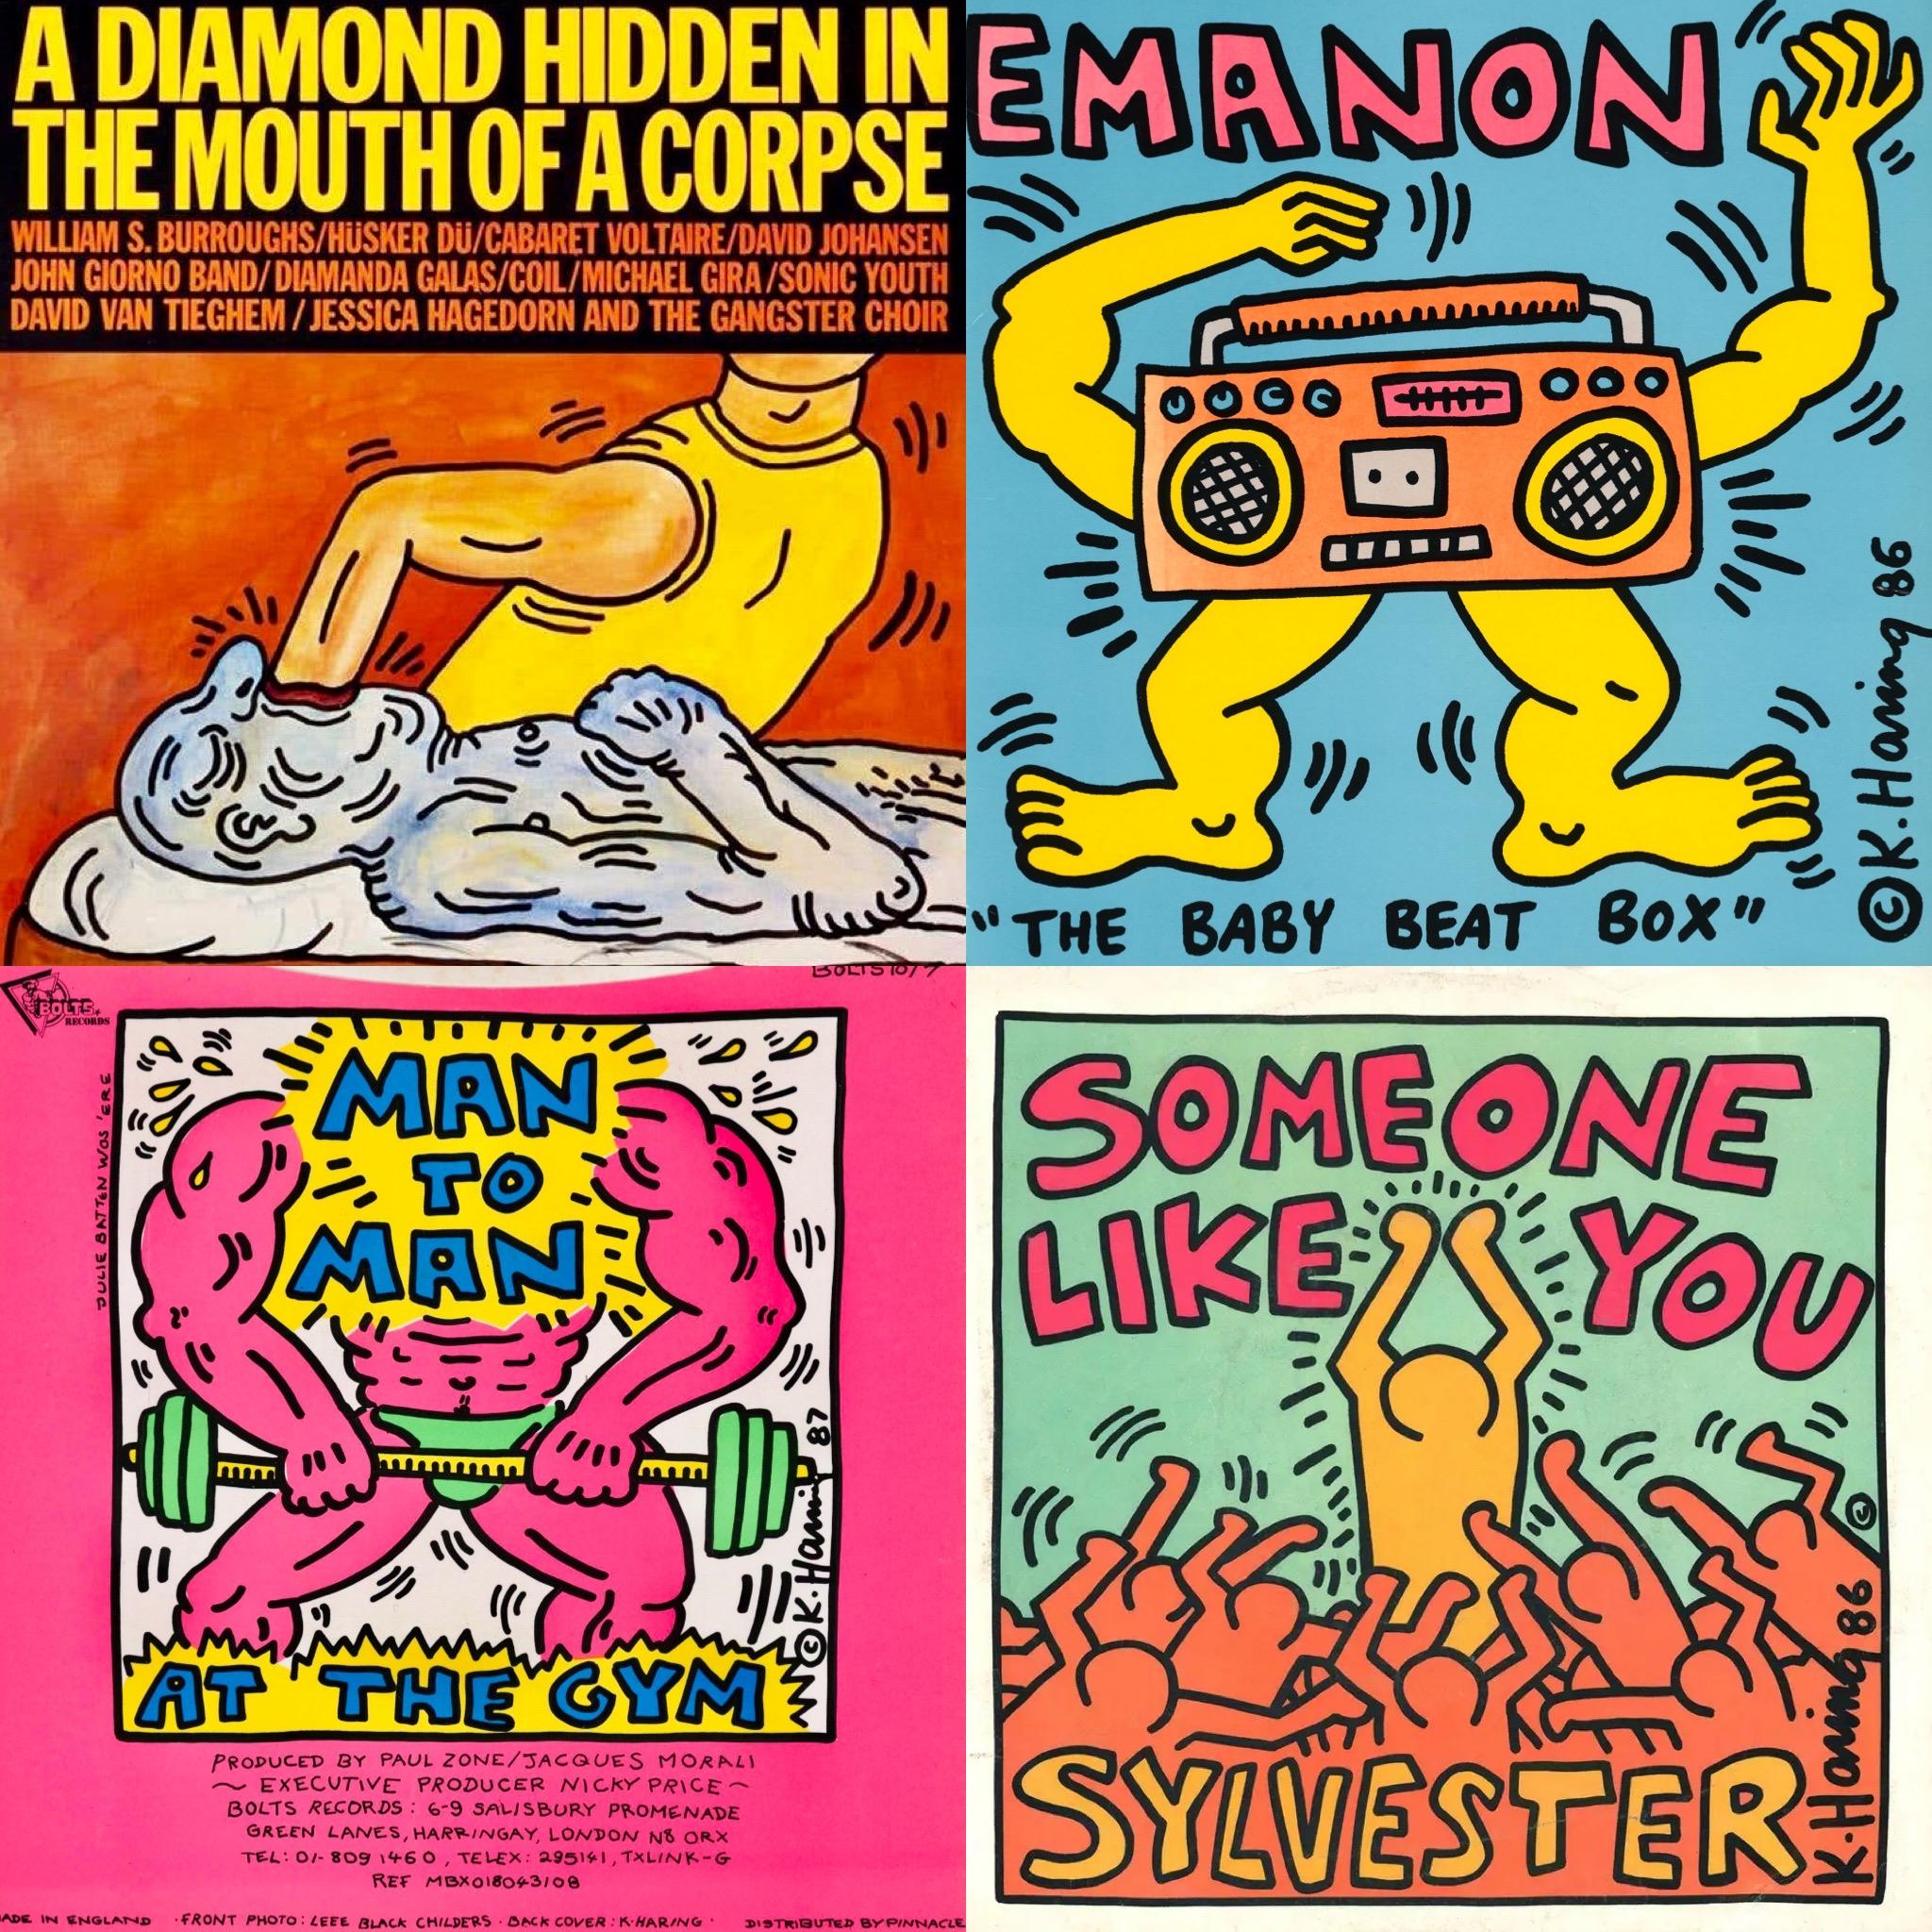 1980s Keith Haring Record Art (set of 4 works):

Four individual 12 inch albums - all illustrated by Haring during his lifetime - making for standout vintage 1980s Keith Haring wall art within reason.

Offset lithographs on record album covers.

12